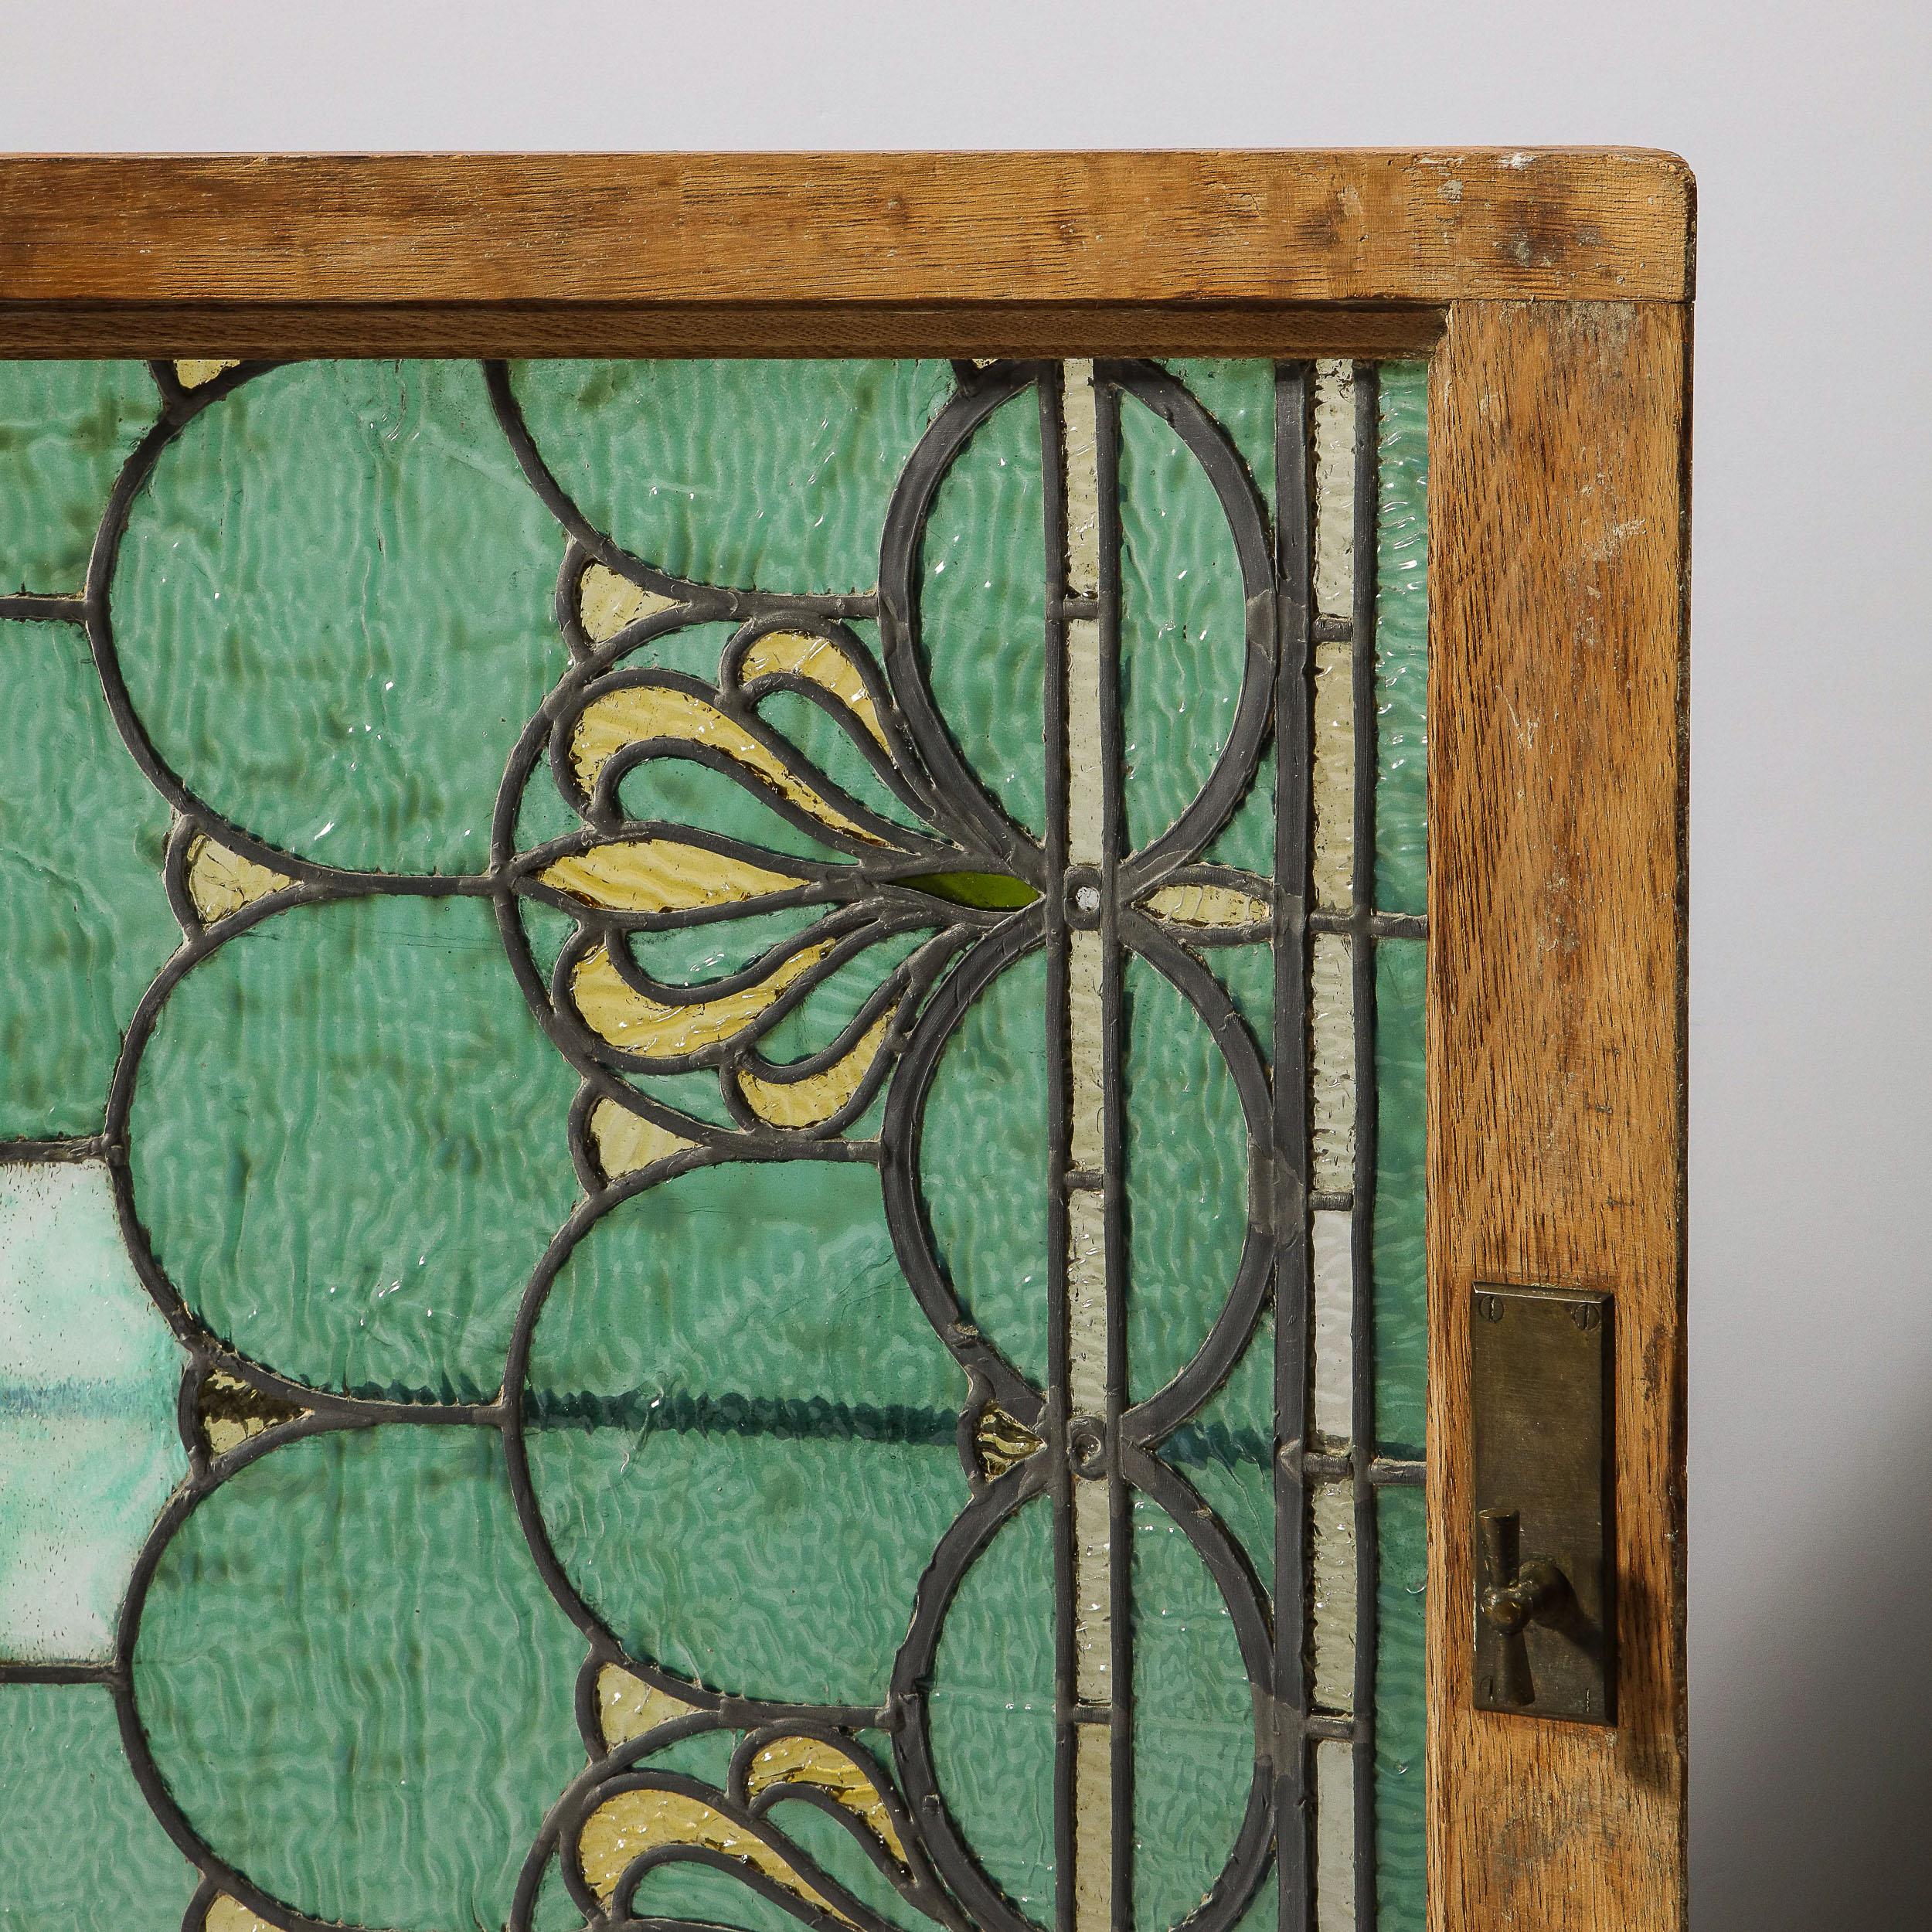 This stunning Art Nouveau window/ panel was realized in the United States in 1907, attributed to Tiffany & Co. The piece features a mosaic of interlocking demilune arch forms in hues of mottled textural seafoam and emerald with citrine accents, all